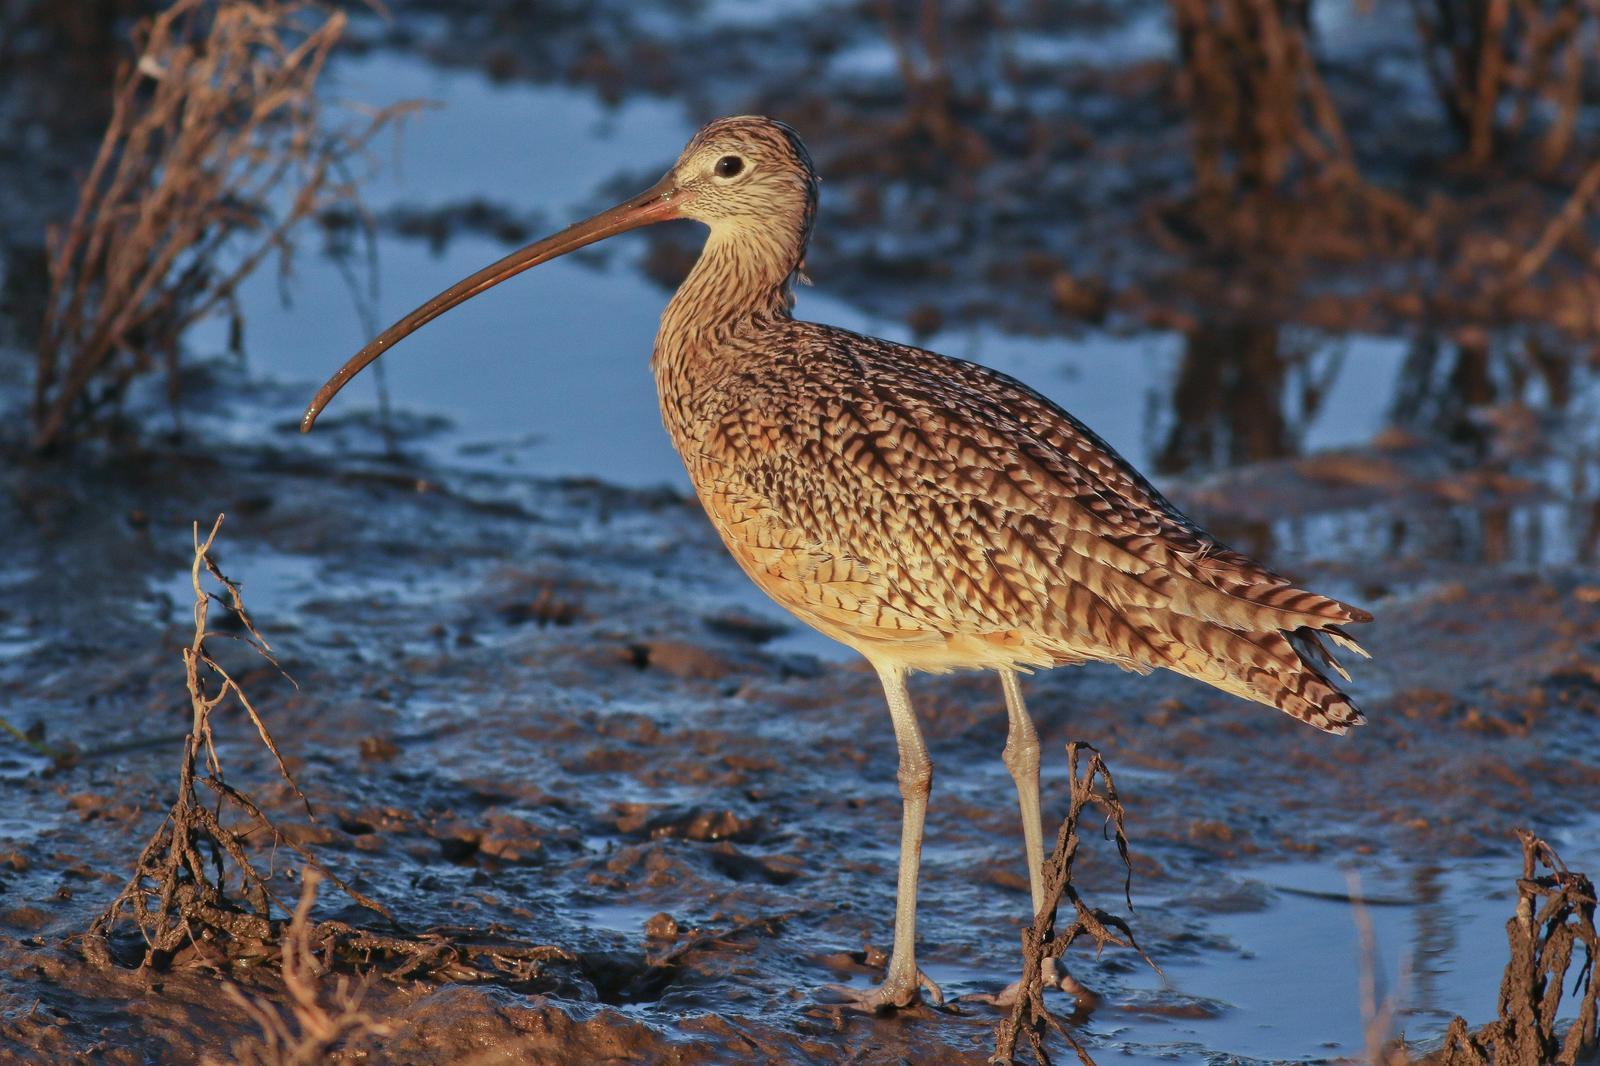 Long-billed Curlew Photo by Tom Ford-Hutchinson